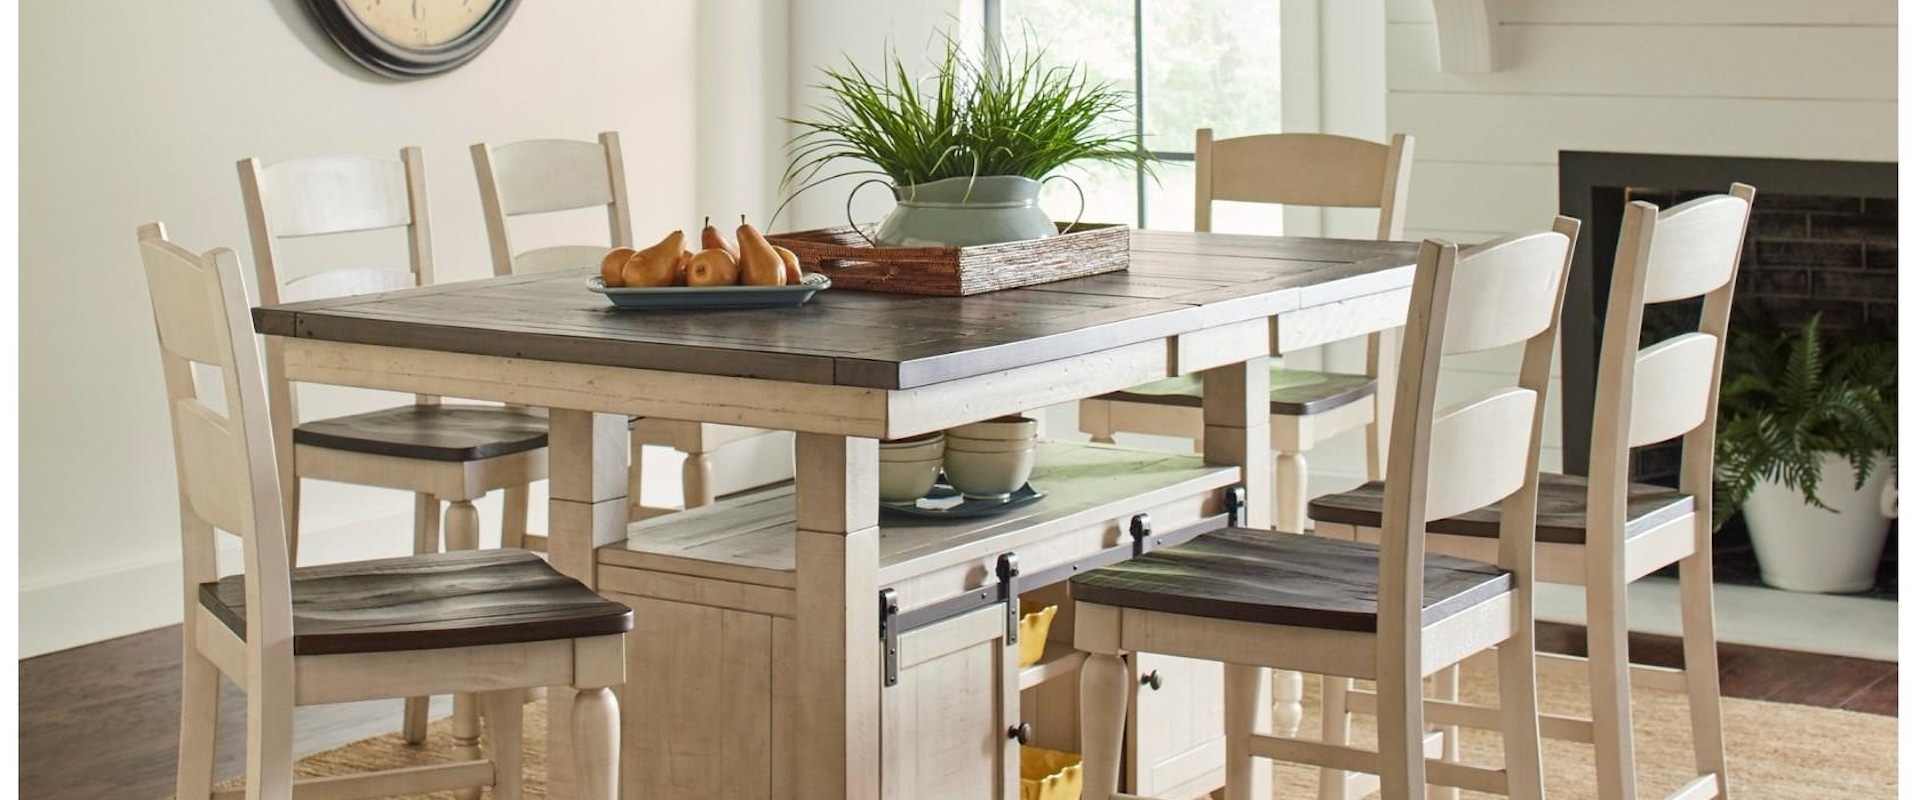 Farmhouse Counter height table and 6 stools